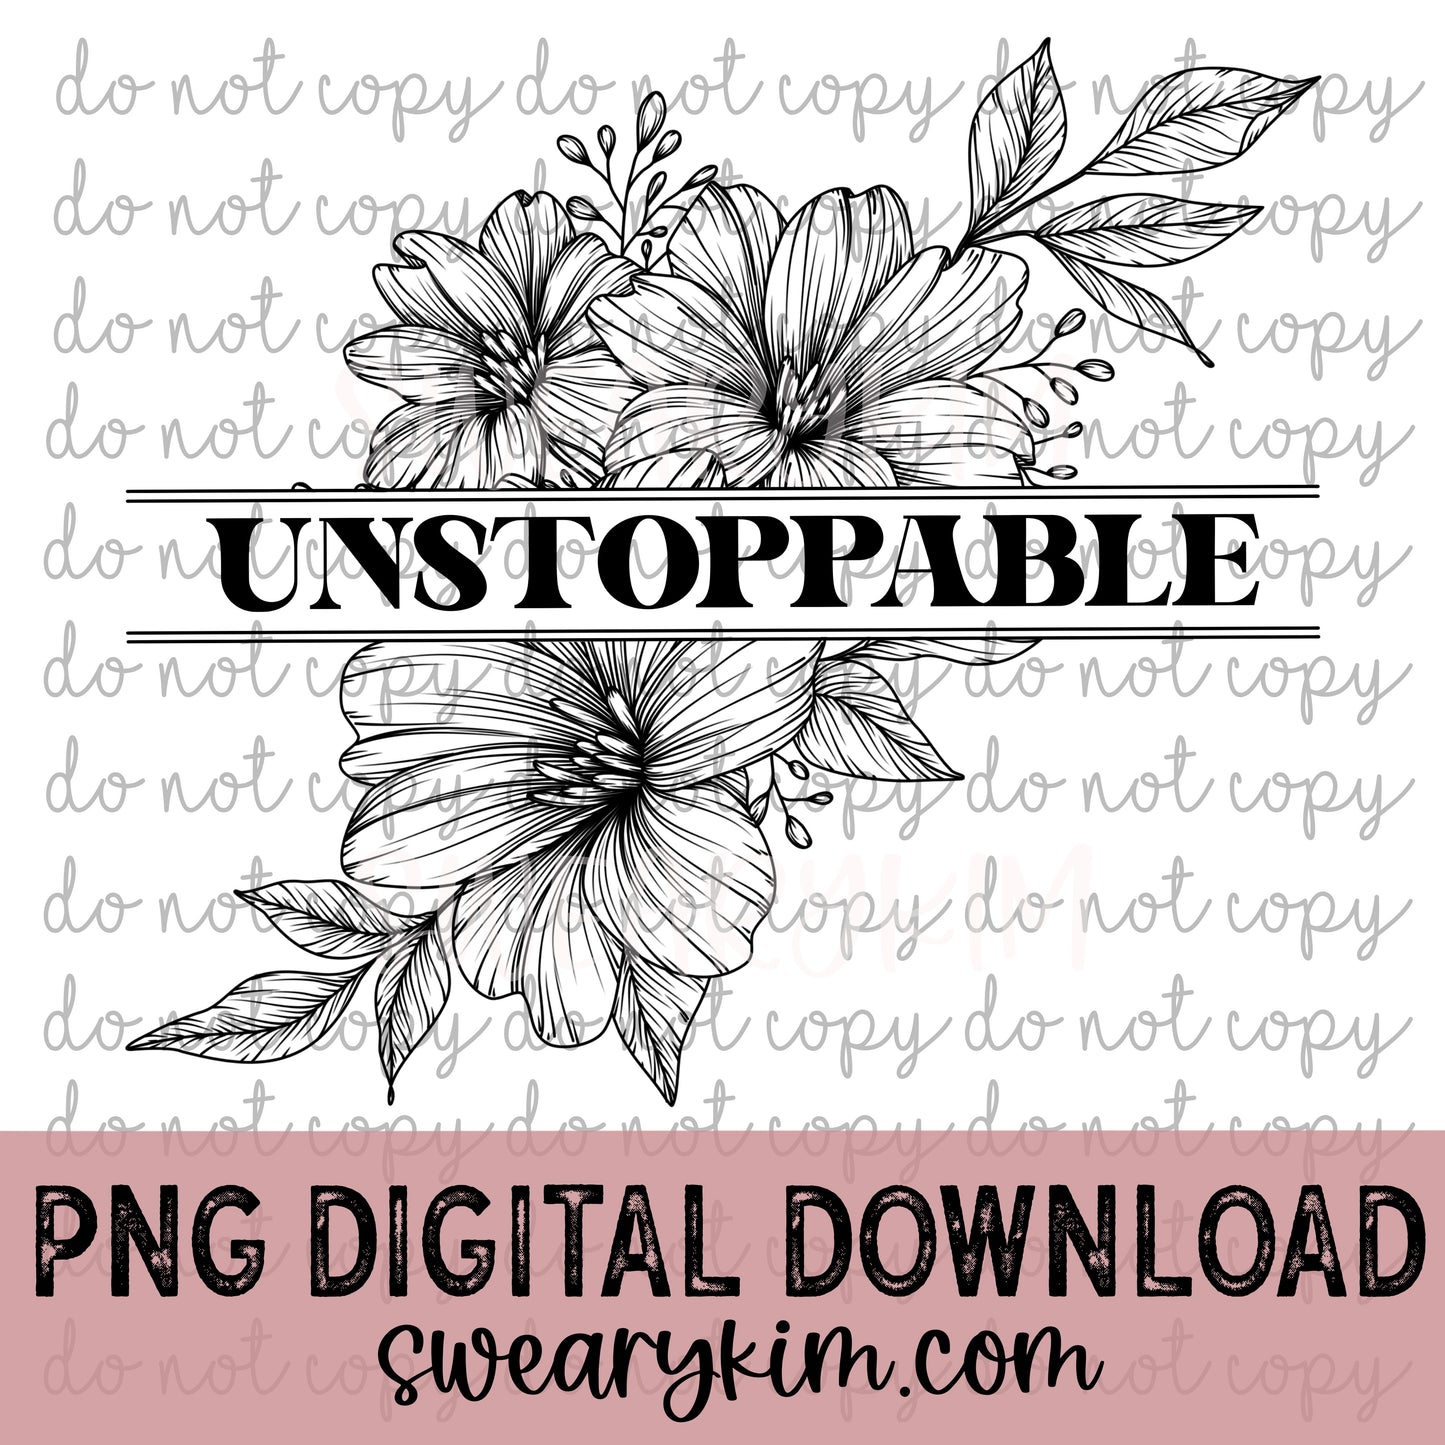 Unstoppable PNG DOWNLOAD